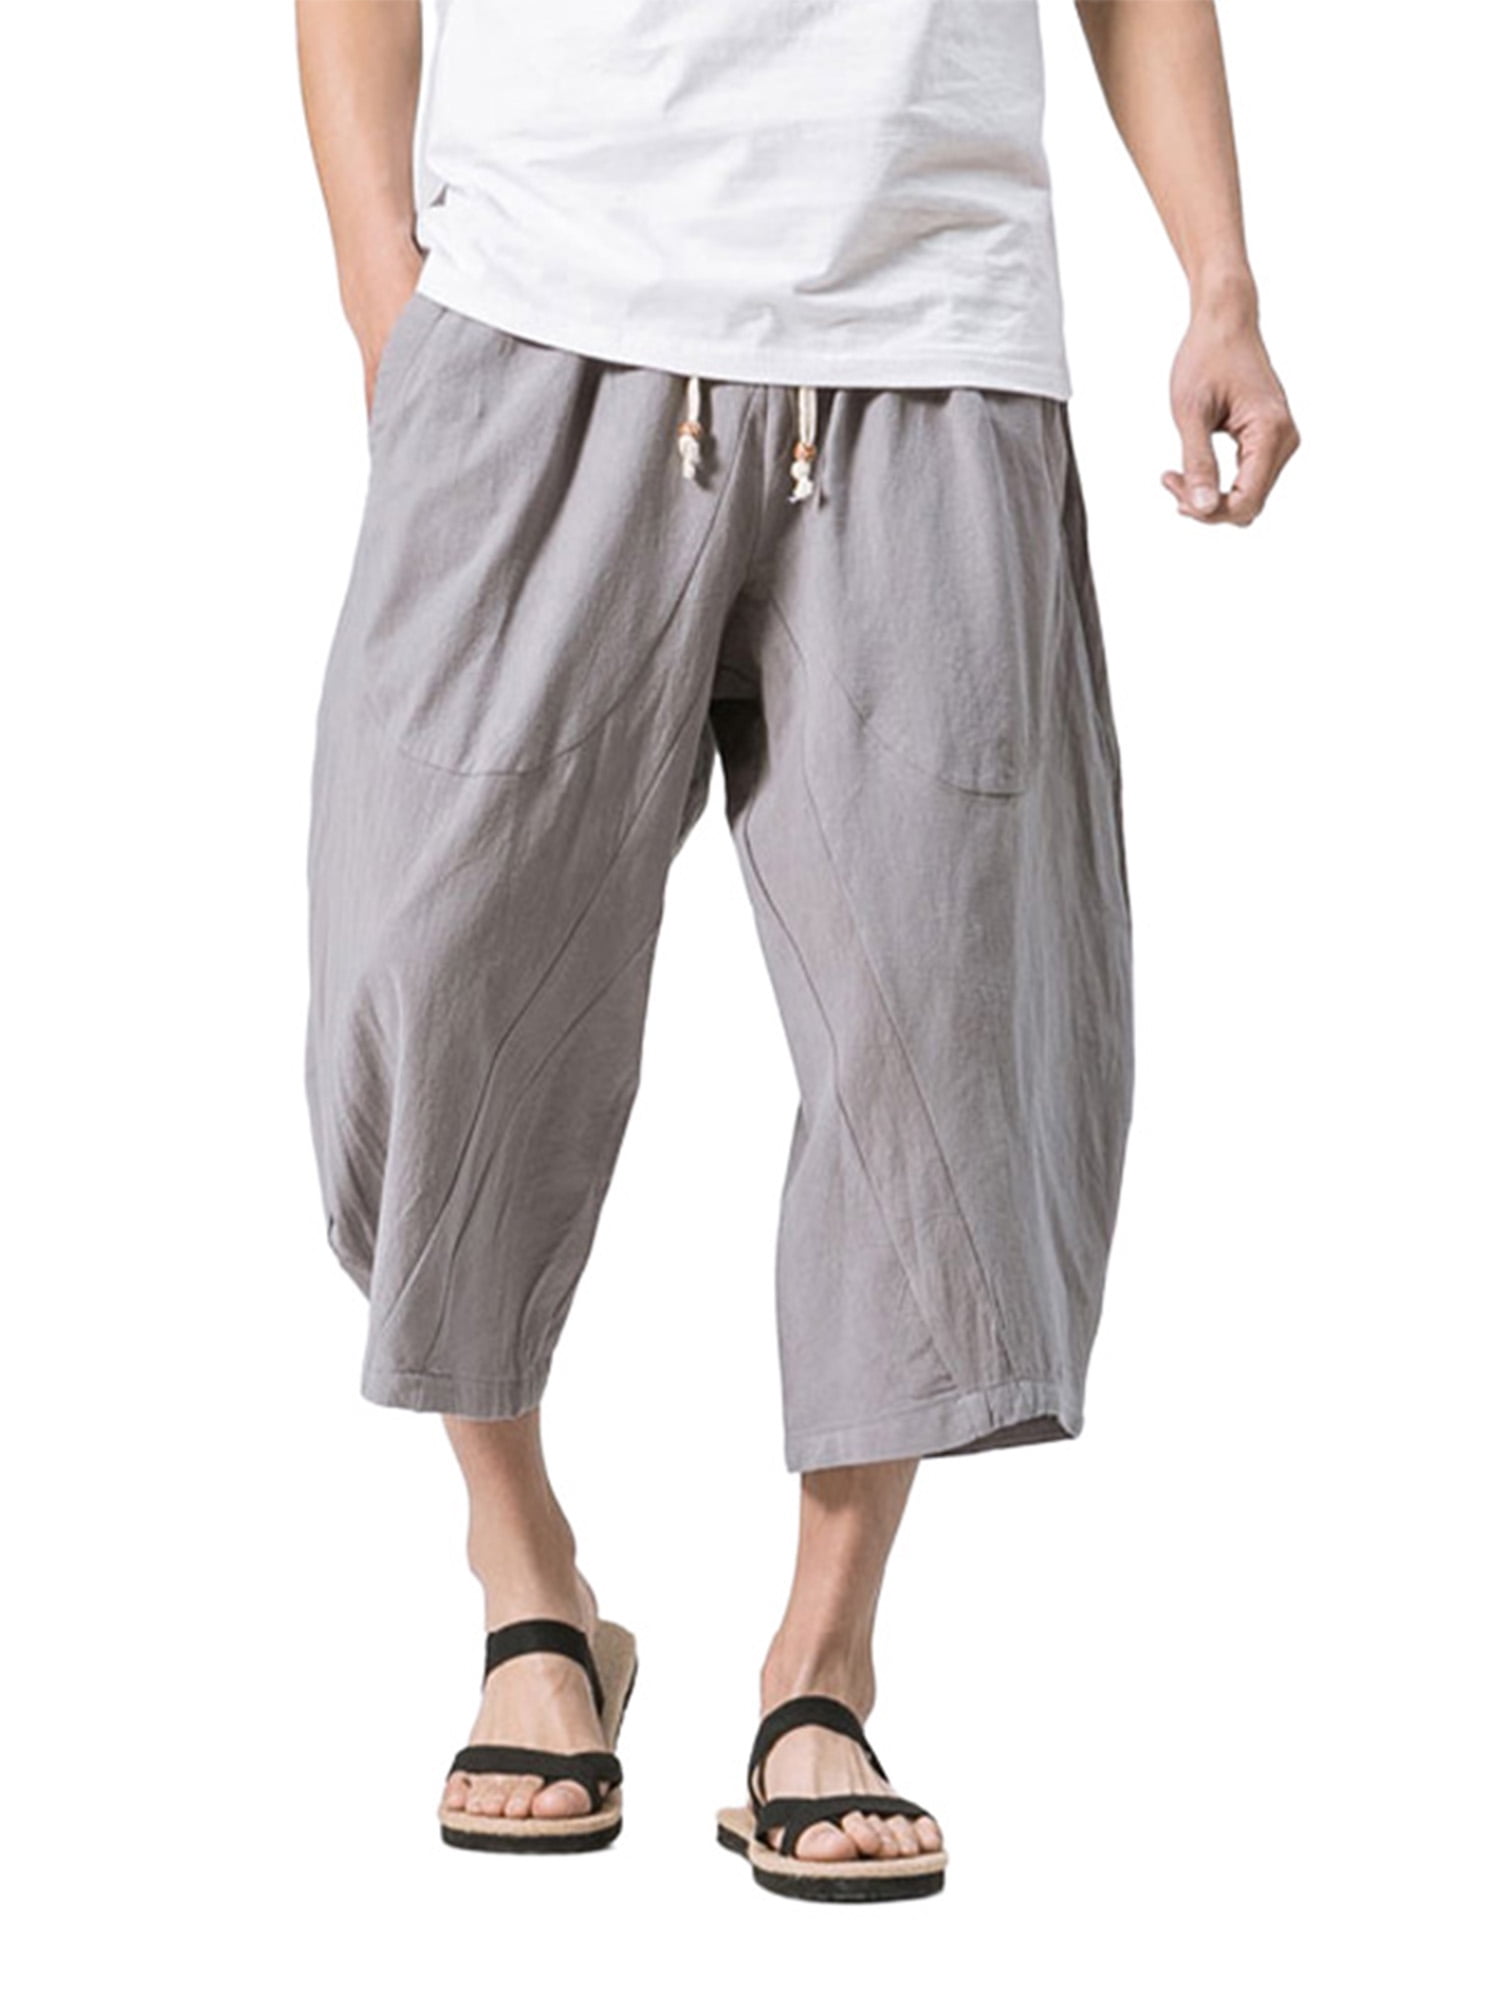 Summer Mens Casual Cotton Solid Loose Linen Drawstring 3/4 Short Trousers Pants 